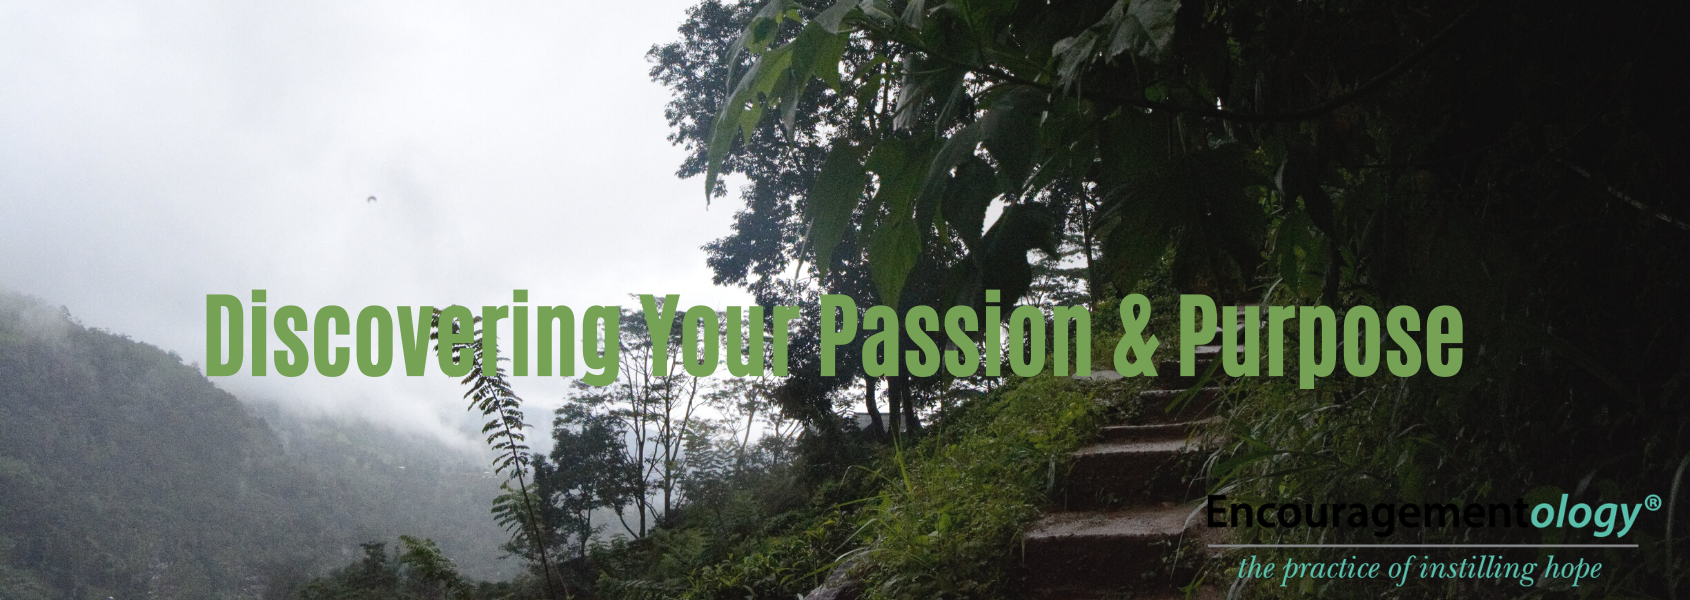 Discovering your passion and purpose